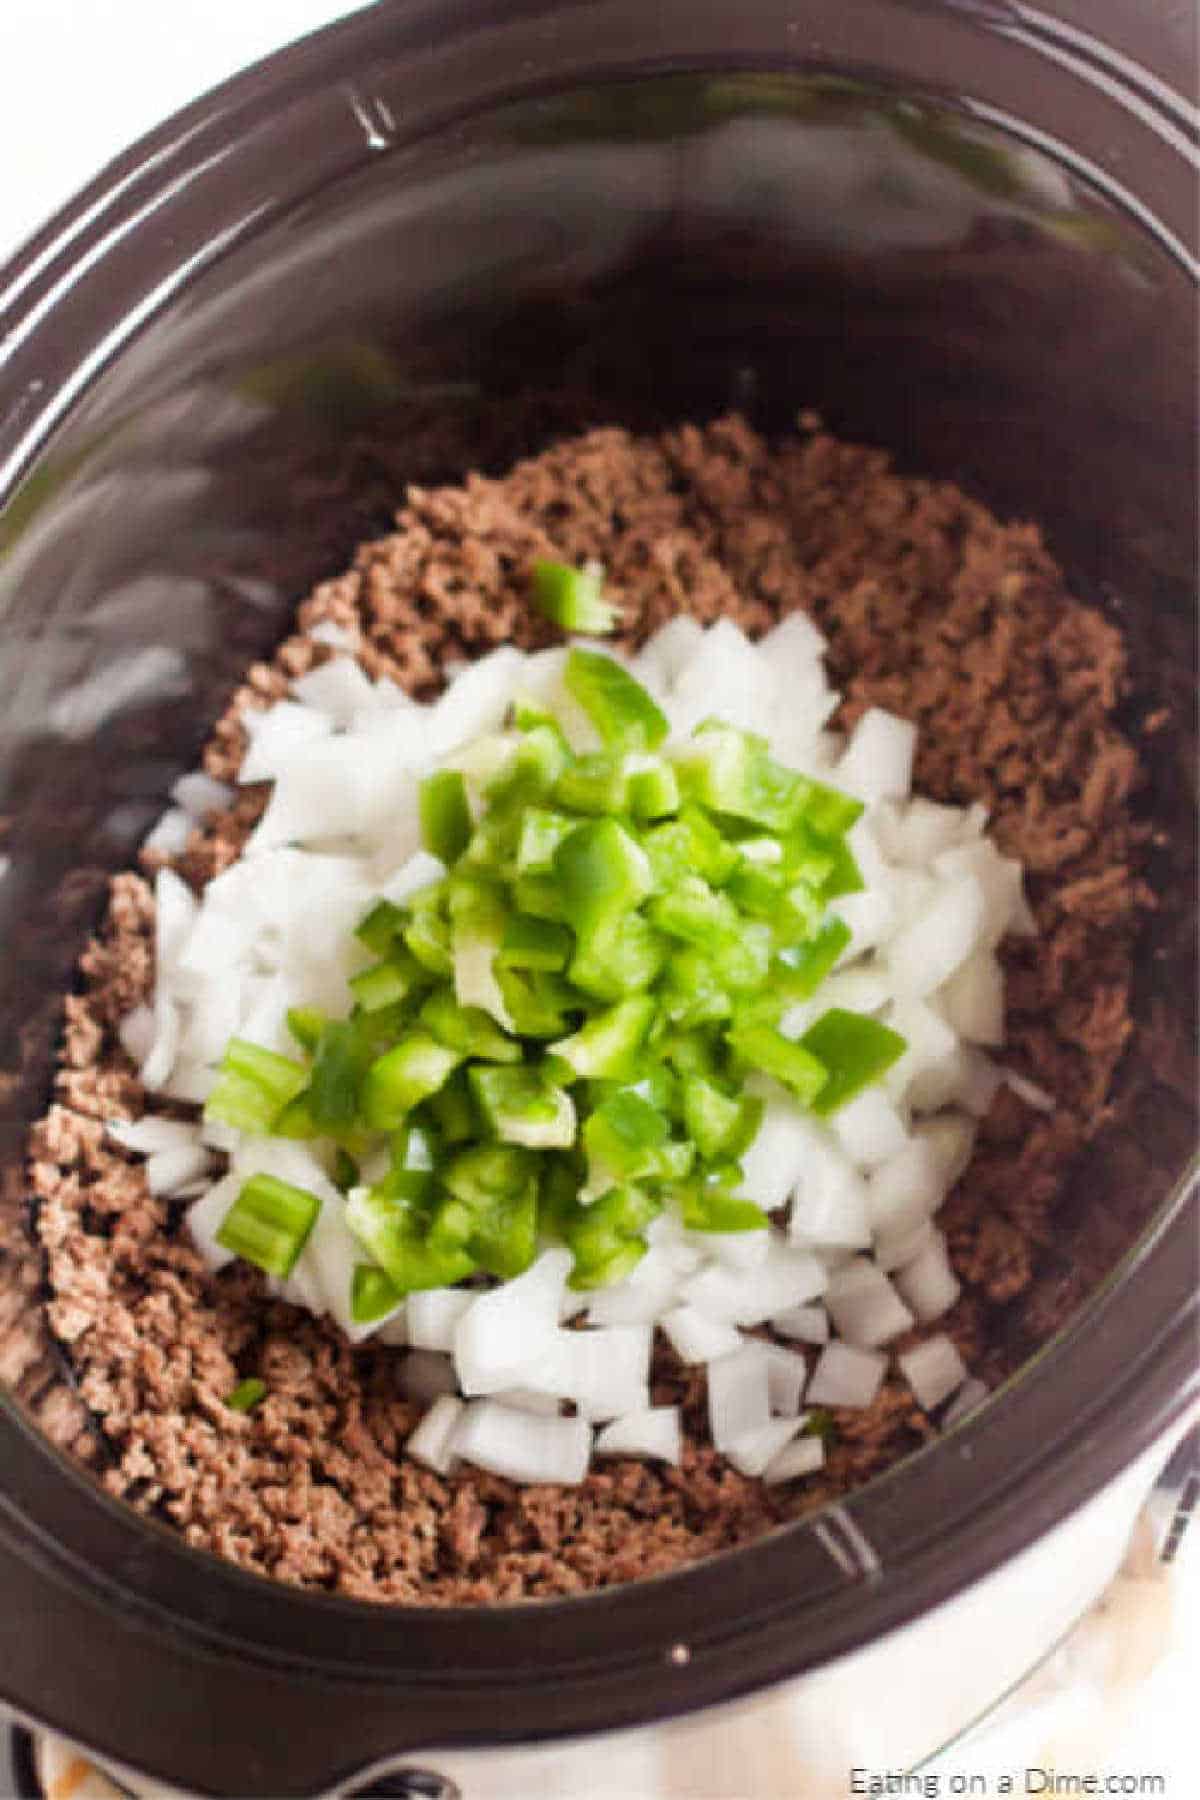 Placing the ground beef in the slow cooker topped with diced onions and green bell peppers